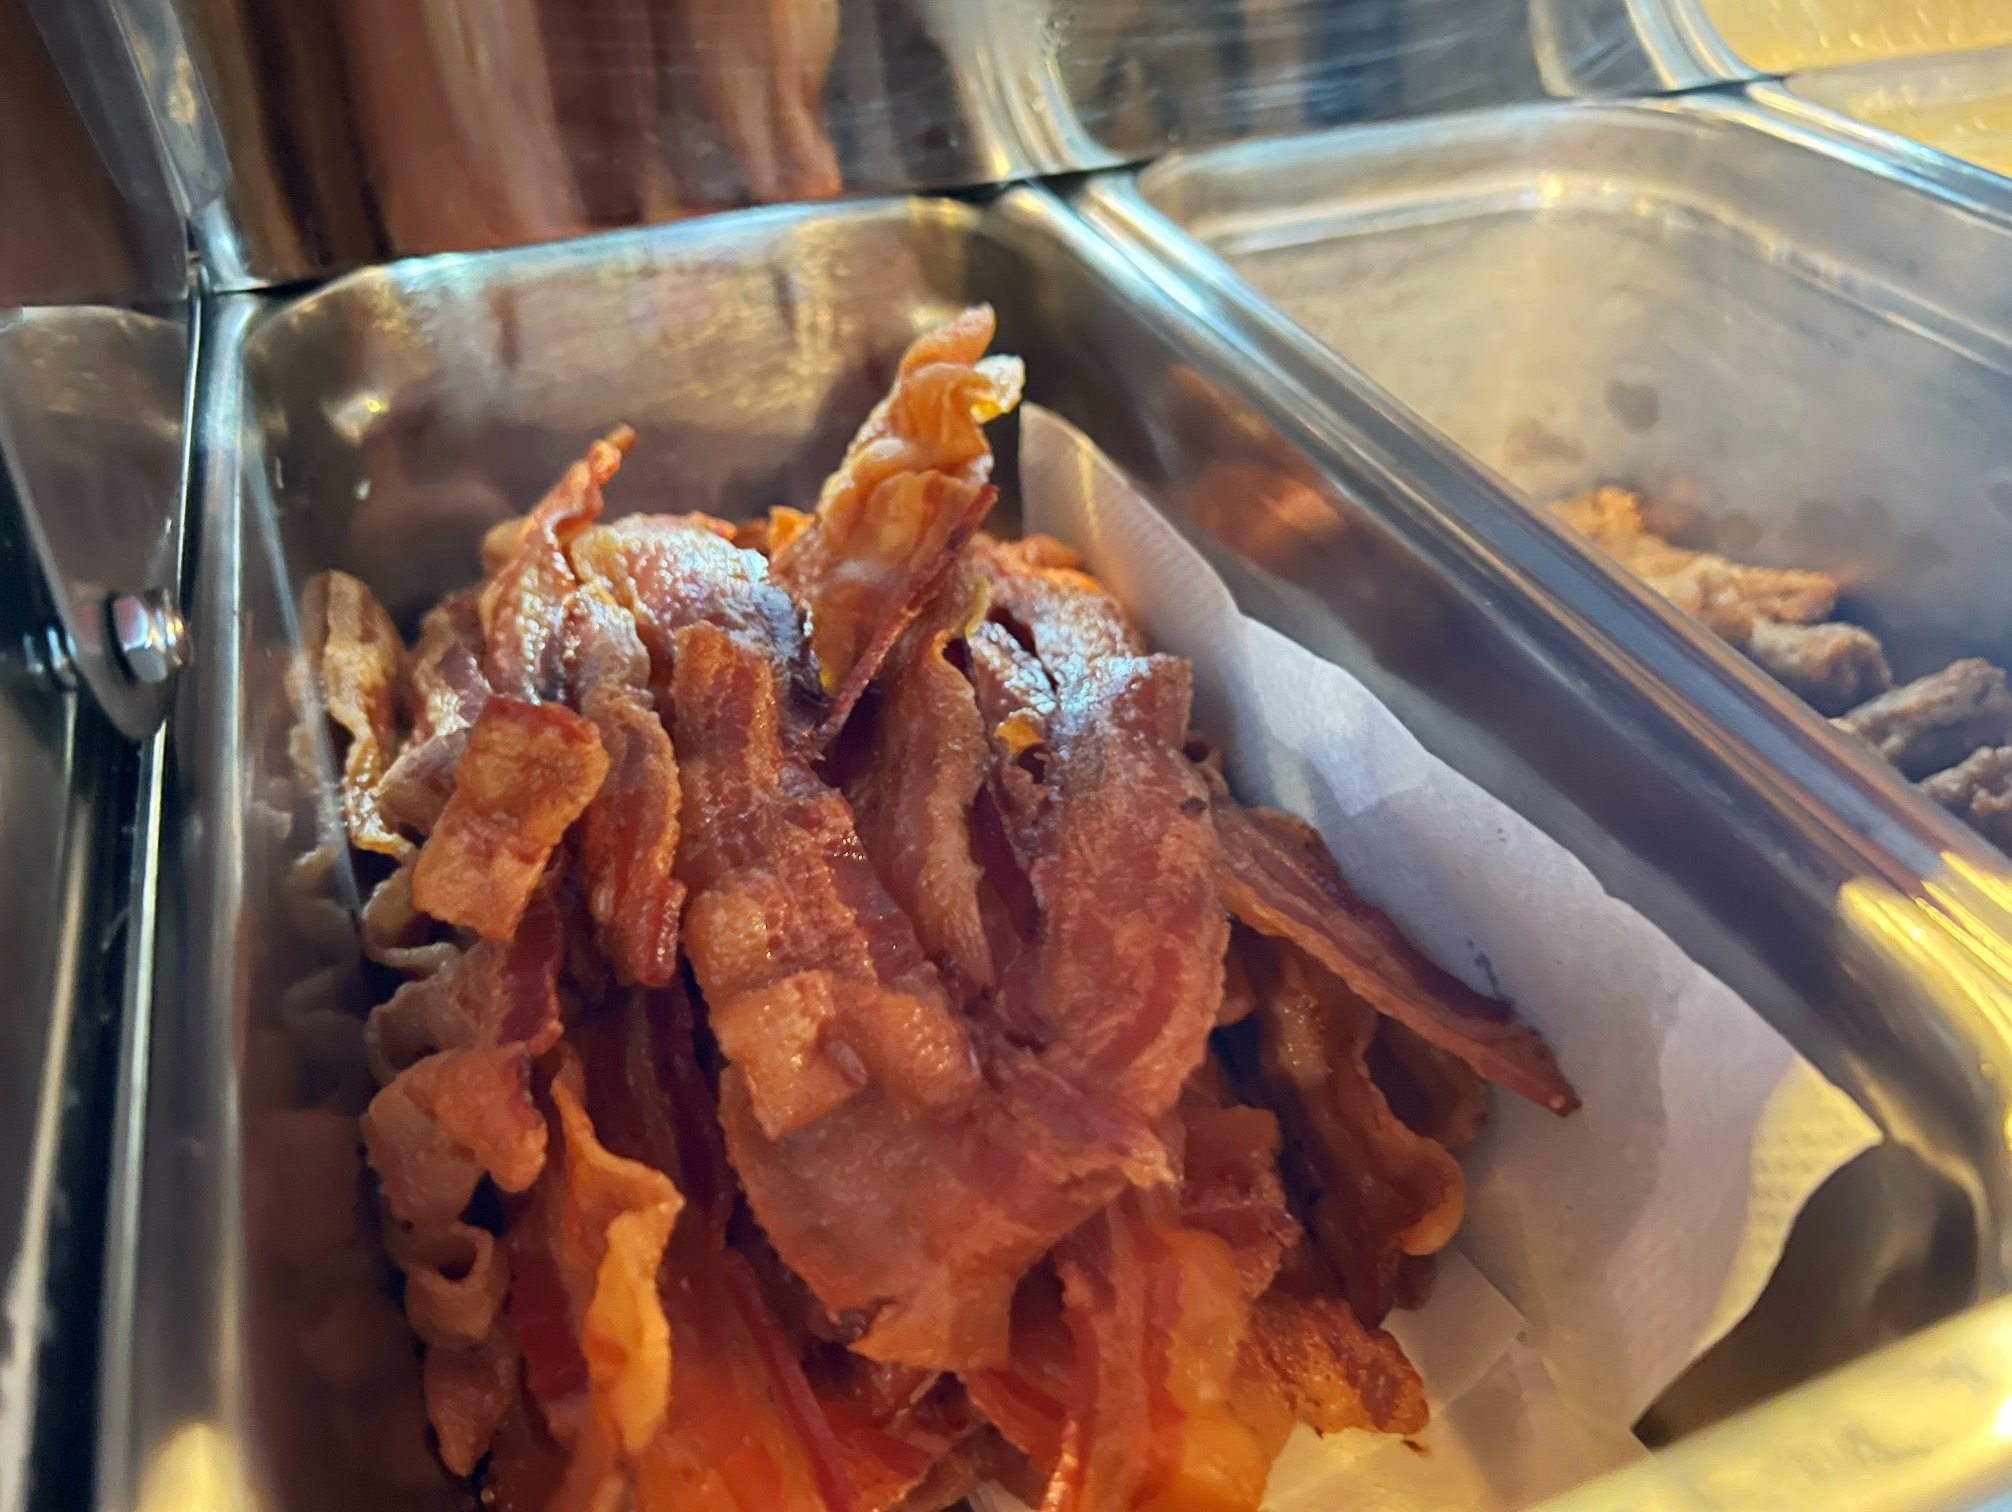 In a paper towel lined metal container, there are strips of bacon. Photo by Alyssa Buckley.